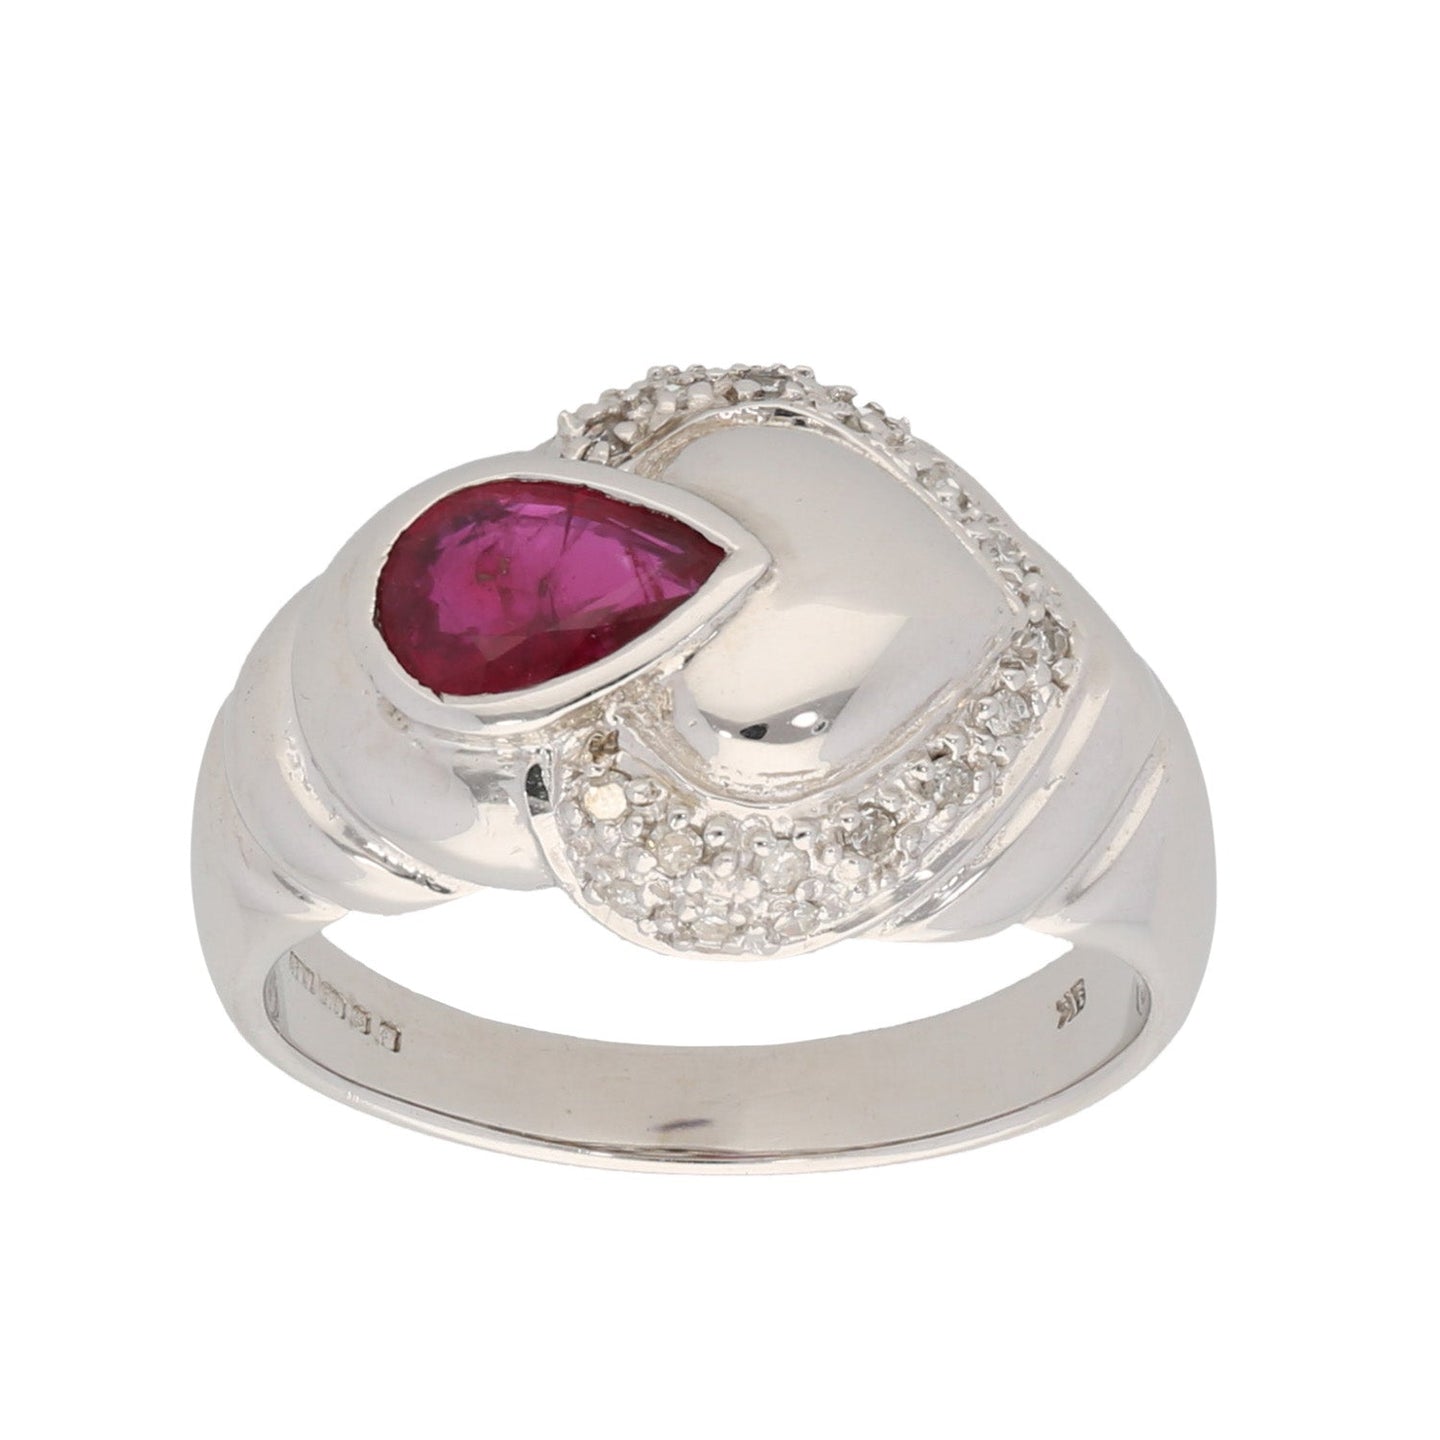 9ct White Gold 0.19ct Diamond & Ruby Dress/Cocktail Ring Size N